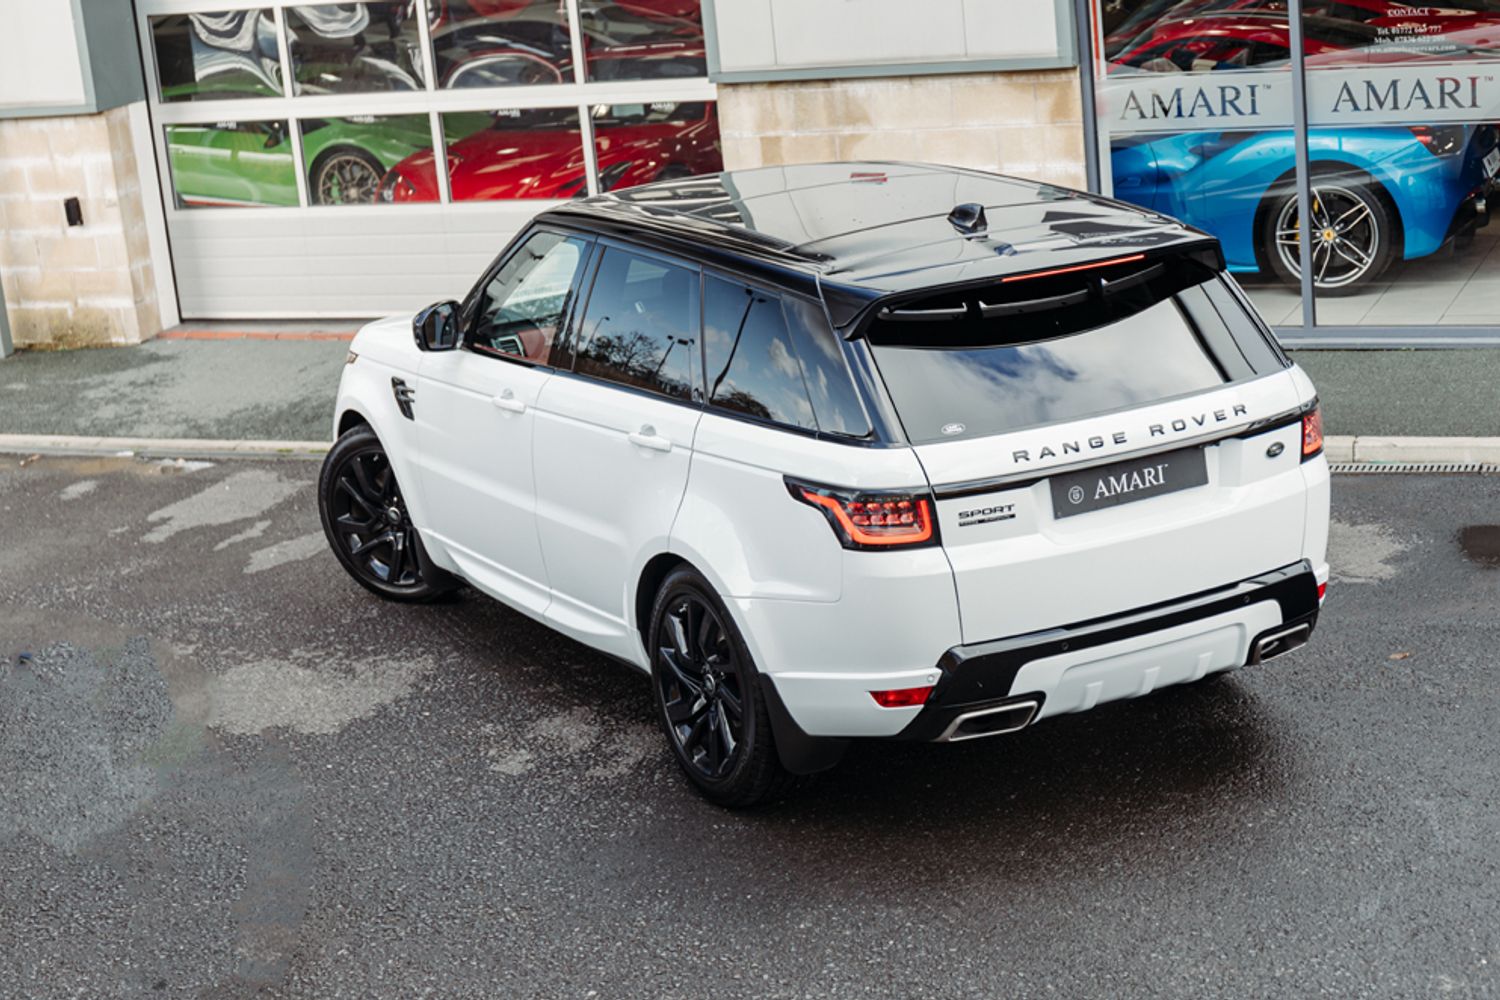 LAND ROVER RANGE ROVER SPORT HYBRID ELECTRIC ESTATE 2.0 HSE DYNAMIC 5DR AUTOMATIC